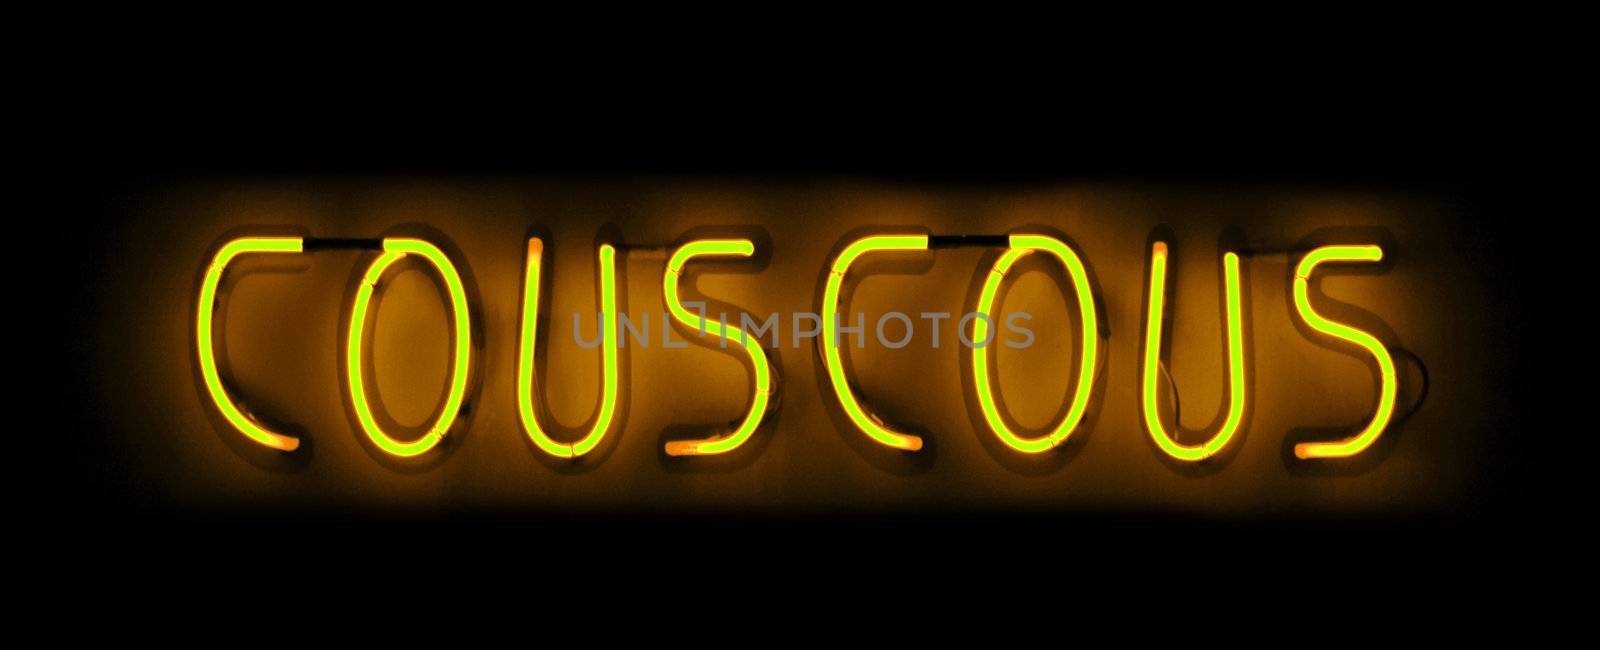 Couscous neon sign in yellow on black background in France